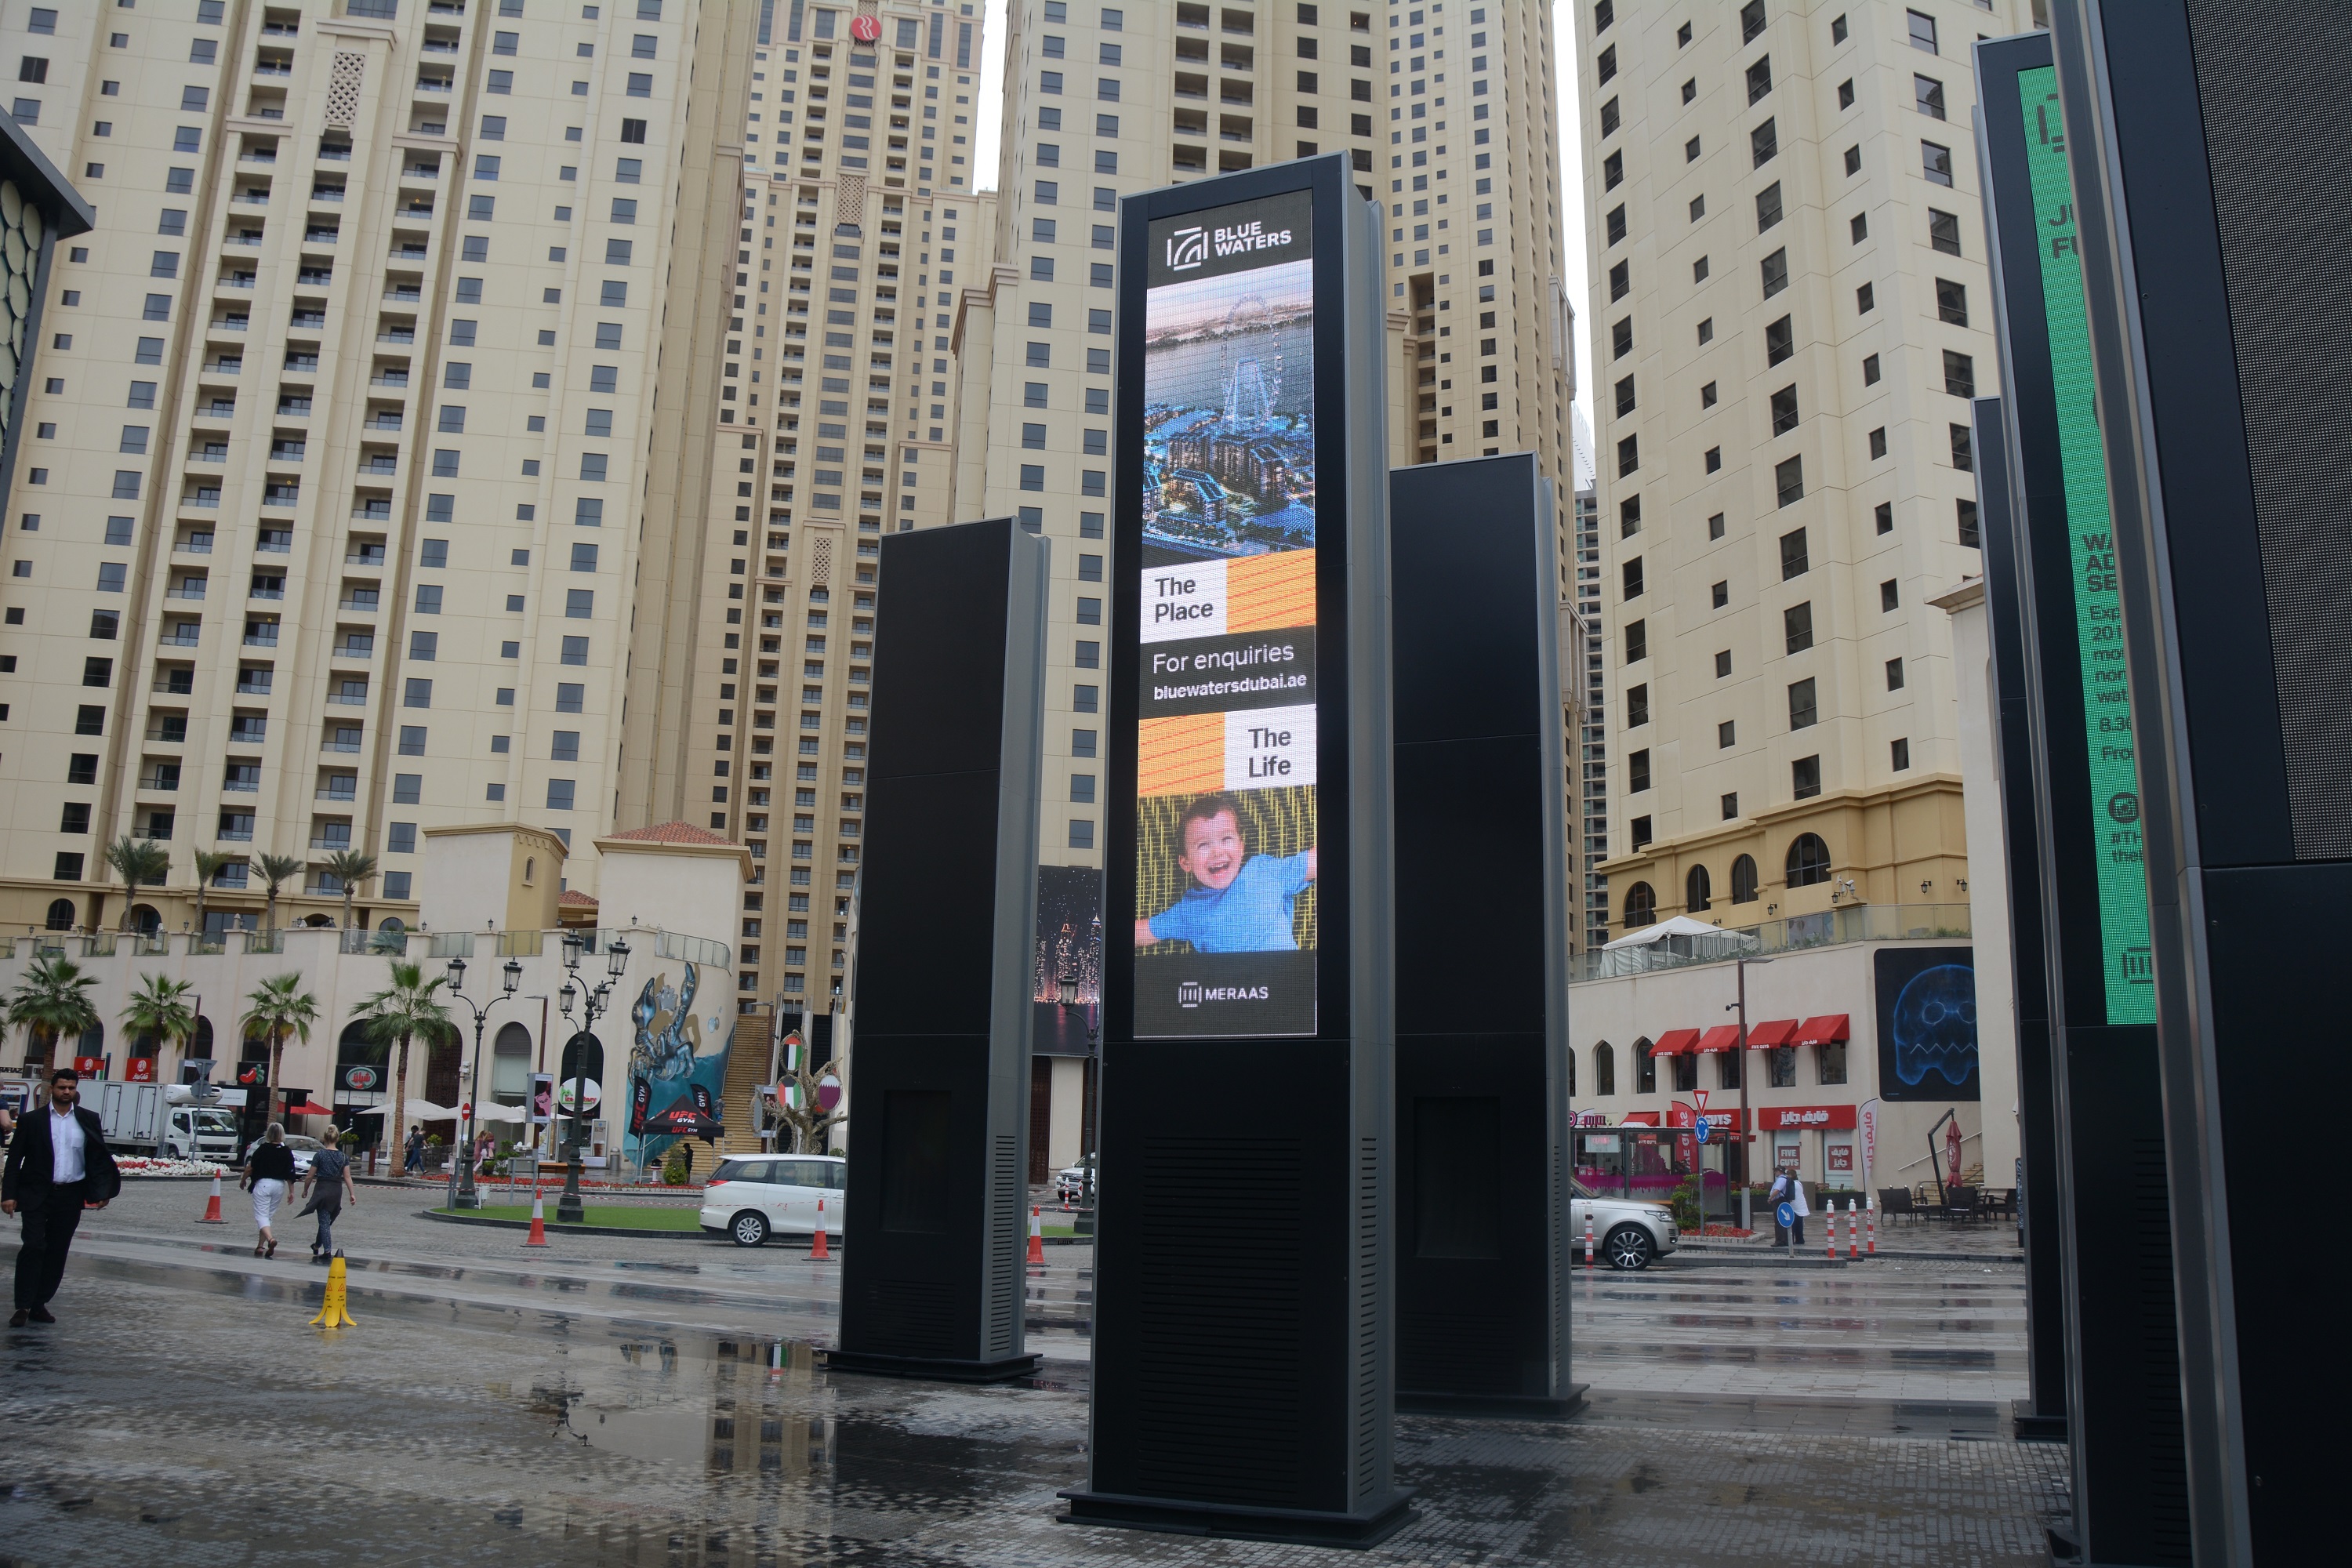 Media Poles & Interactive Touch Screen